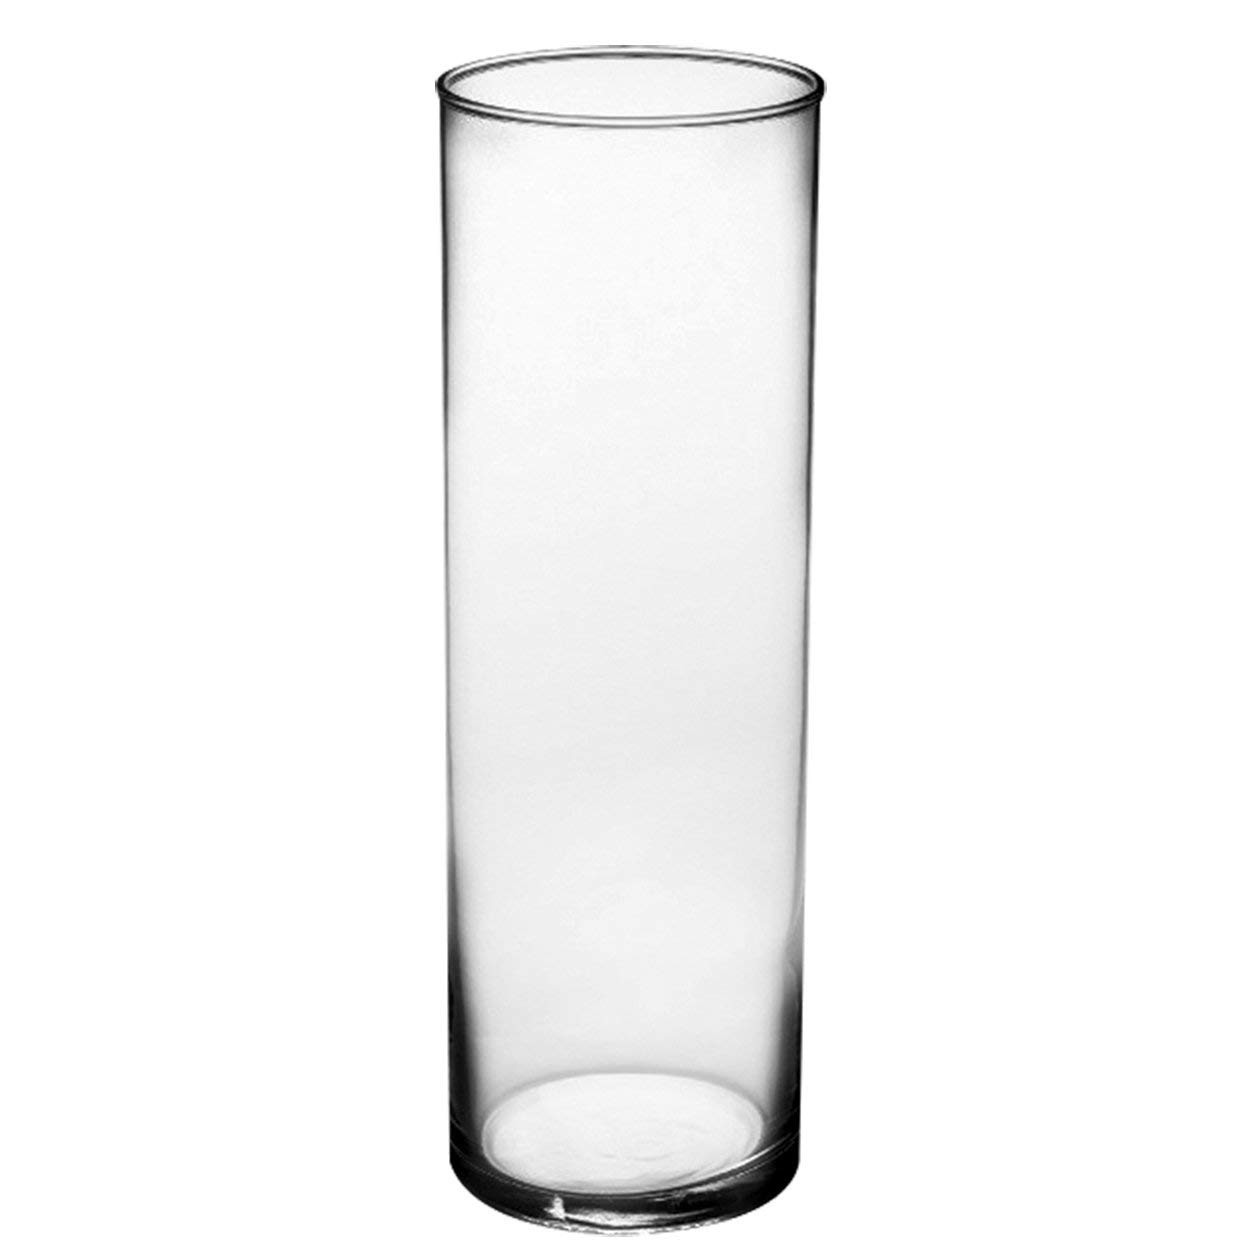 30 attractive Tall Clear Glass Pedestal Vase 2023 free download tall clear glass pedestal vase of amazon com syndicate sales 3 1 2 x 10 1 2 cylinder vase clear pertaining to amazon com syndicate sales 3 1 2 x 10 1 2 cylinder vase clear planters garden ou